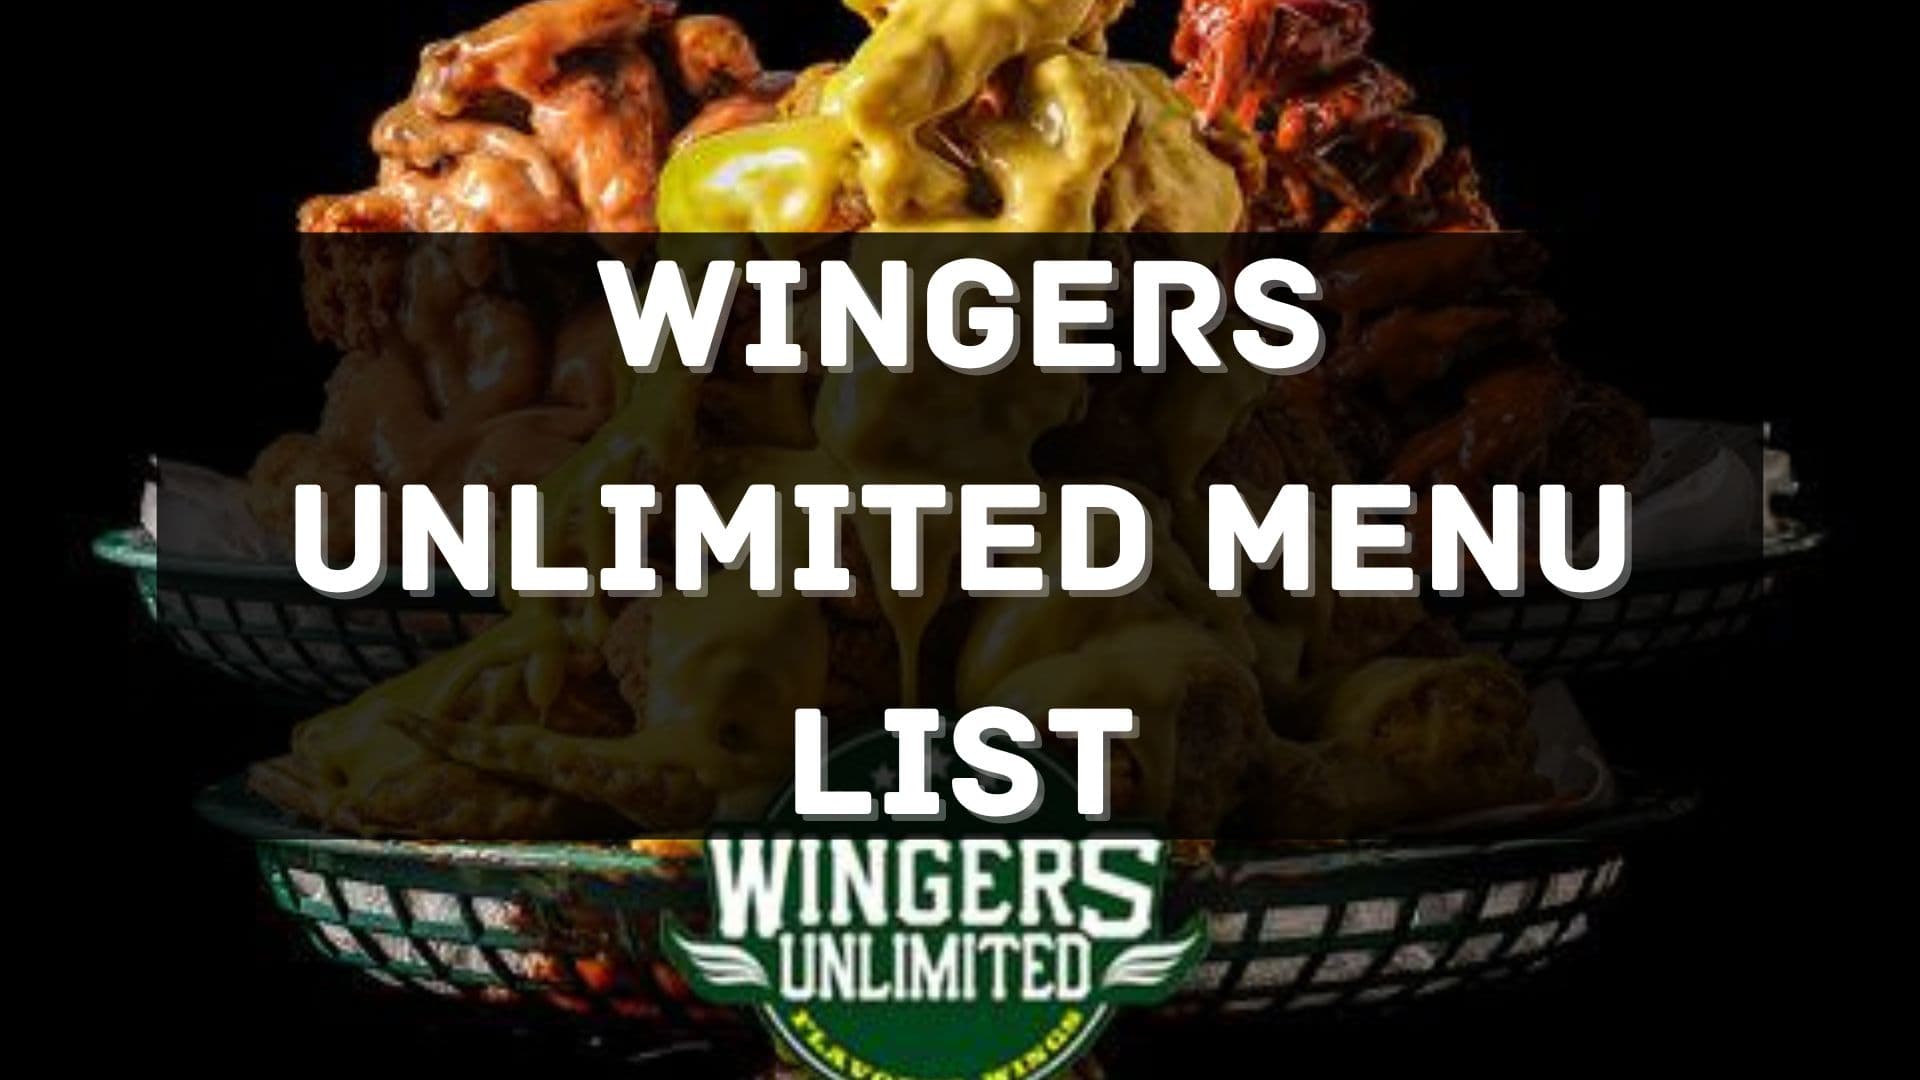 wingers unlimited menu prices philippines